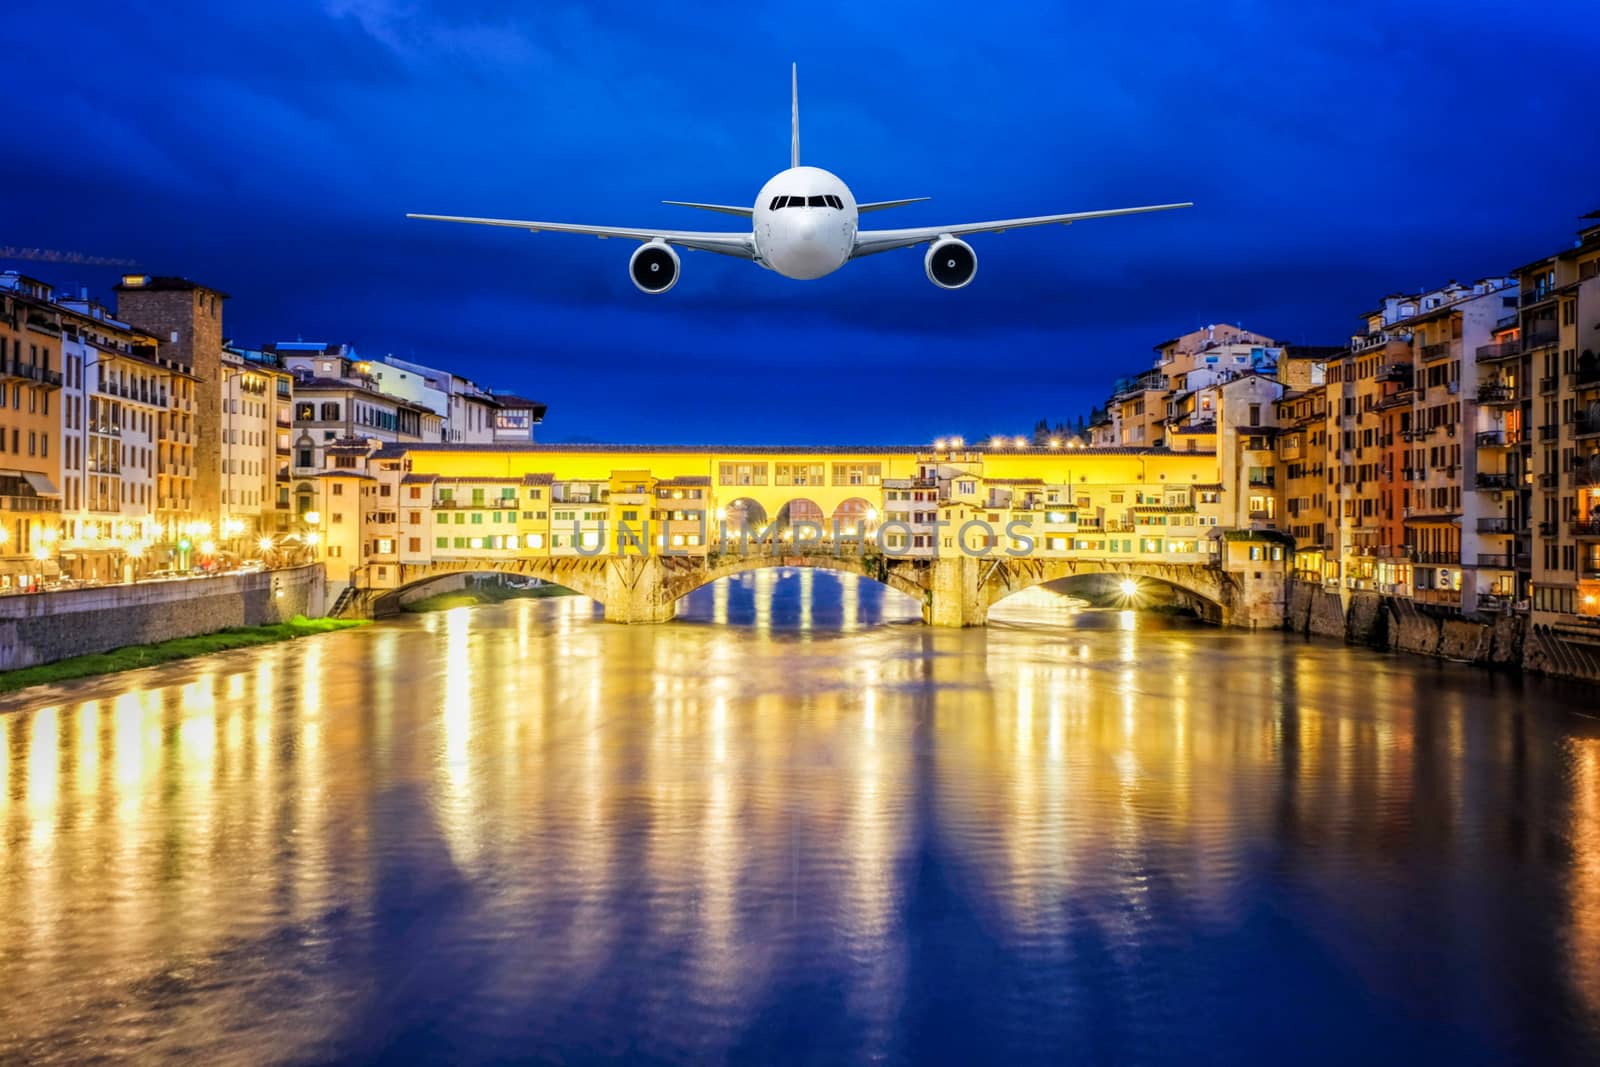 Front of real plane aircraft, on Ponte Vecchio bridge Nigth view by Surasak